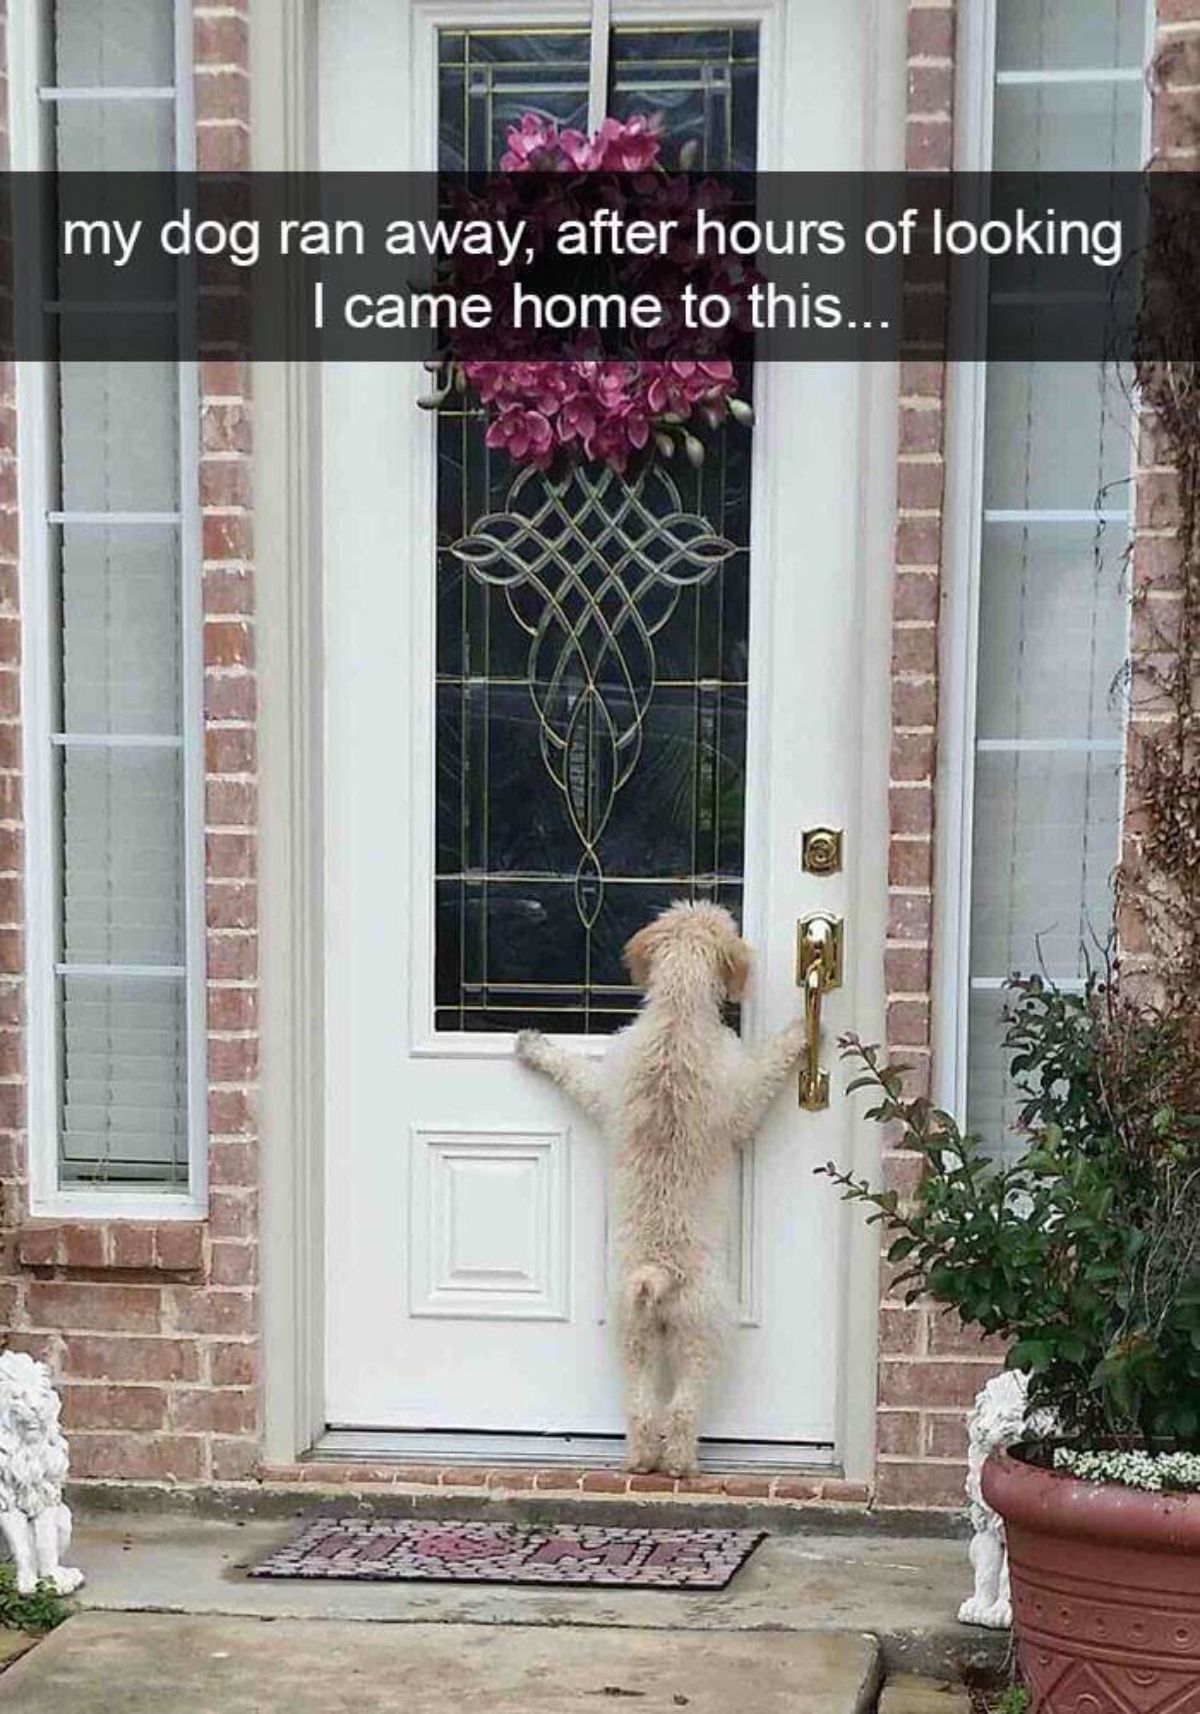 fluffy white dog standing on its hind legs looking in through a glass on a front door of a house with a caption saying my dog ran away, after hours of looking i came home to this...